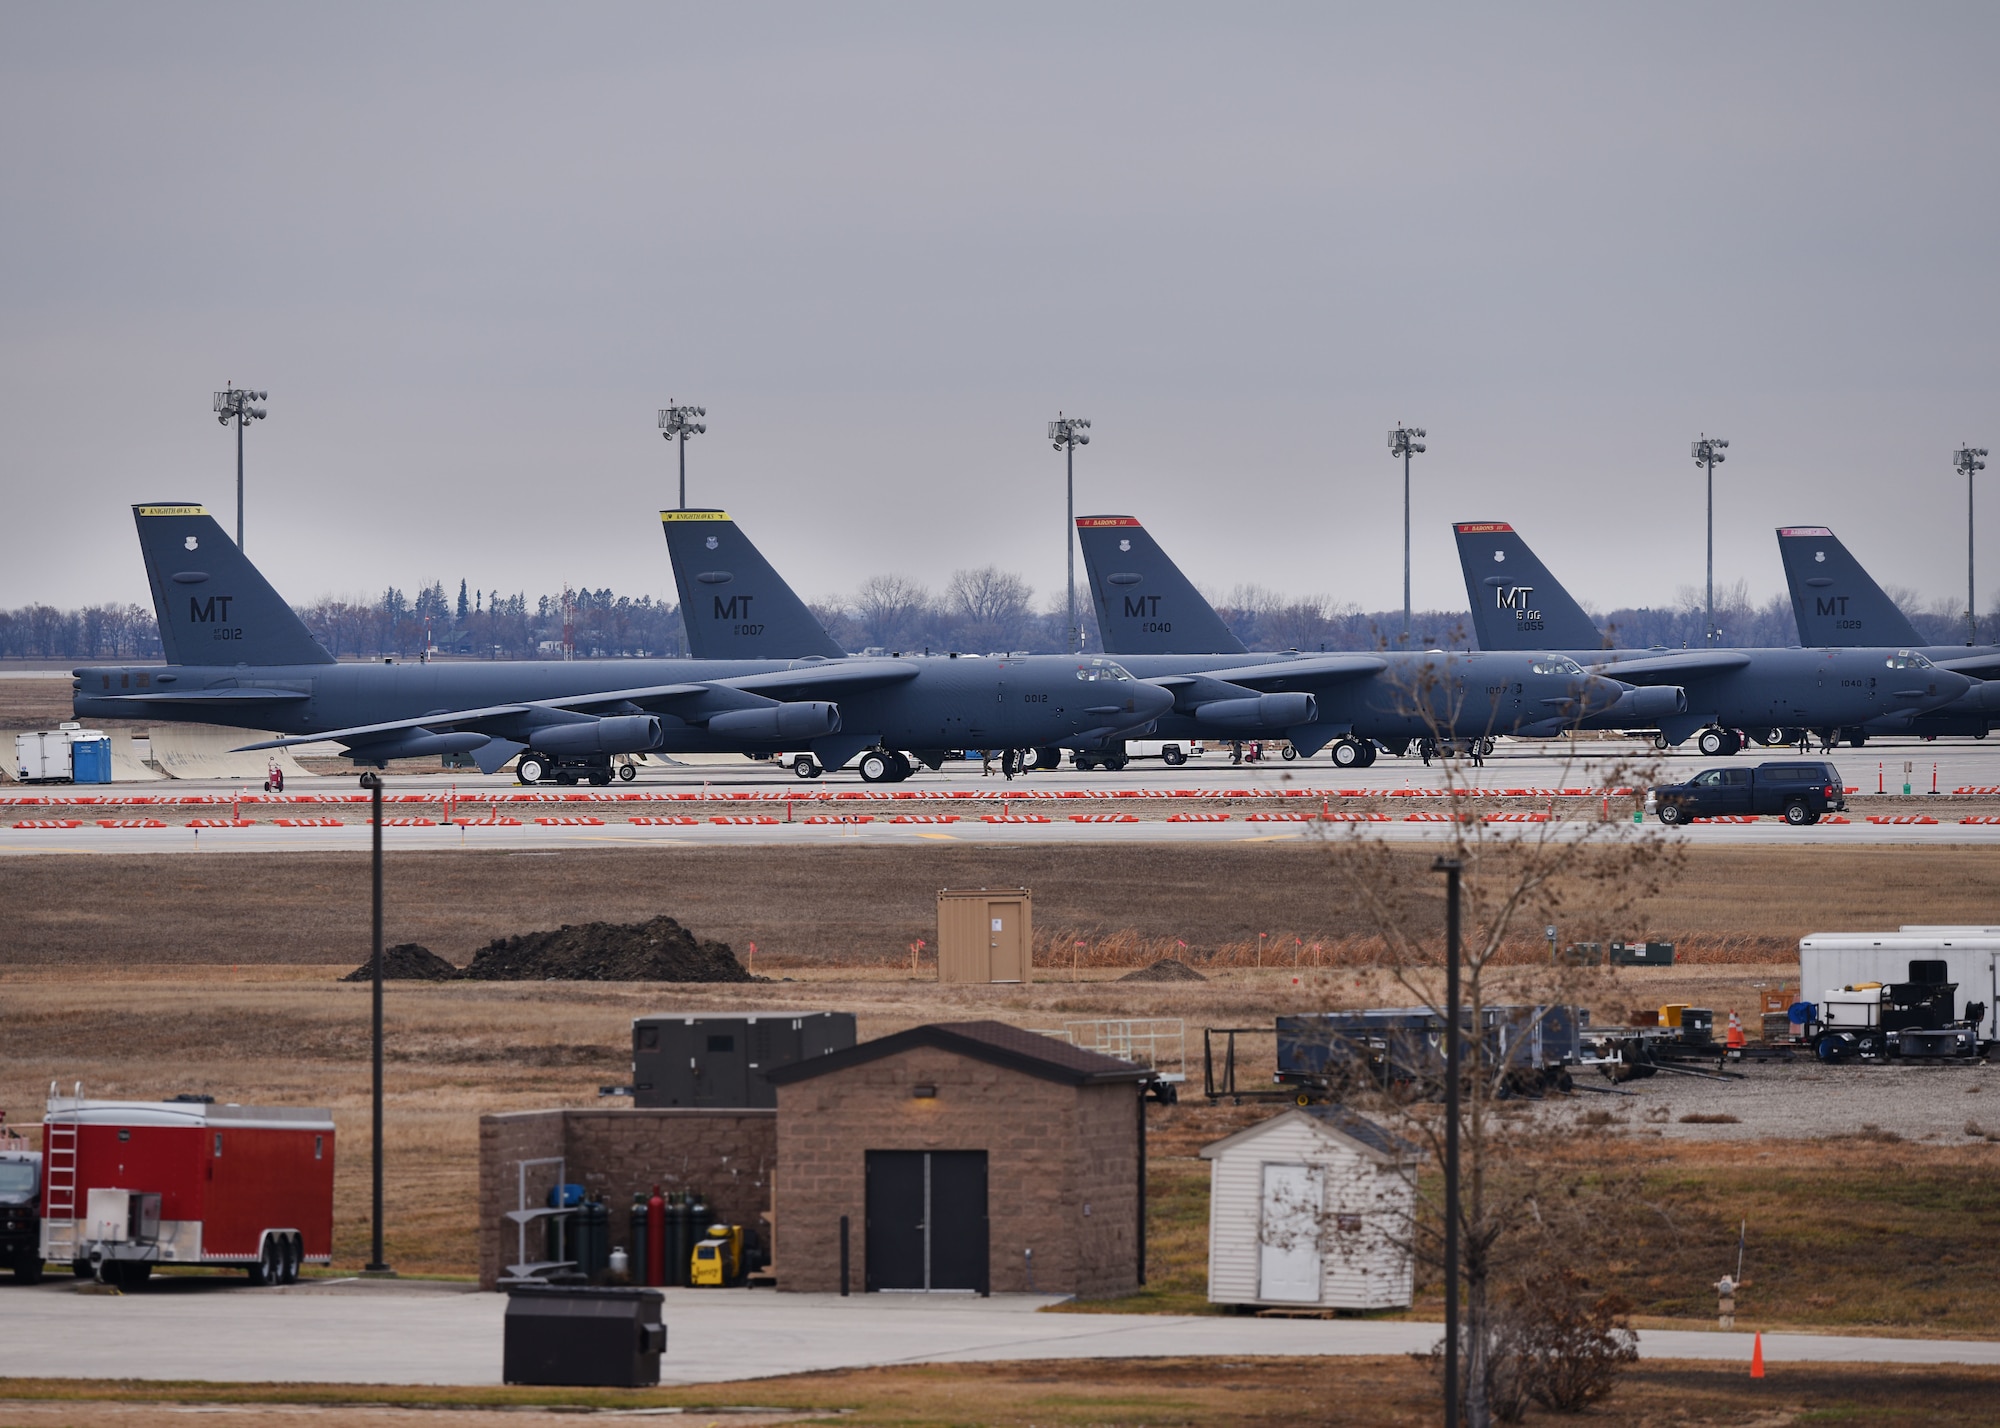 B-52H Stratofortress crew members prepare to take off during Global Thunder 19 at Minot Air Force Base, N.D., Nov. 4, 2018. Global Thunder provides training opportunities that assess all U.S. Strategic Command (USSTRATCOM) mission areas and joint and field training operational readiness, with a specific focus on nuclear readiness. The training is based on a notional scenario developed to drive execution of USSTRATCOM and component forces'; ability to support the geographic combatant commands, deter adversaries and, if necessary, employ forces as directed by the President of the United States. (U.S. Air Force Photo by Airman 1st Class Dillon J. Audit)